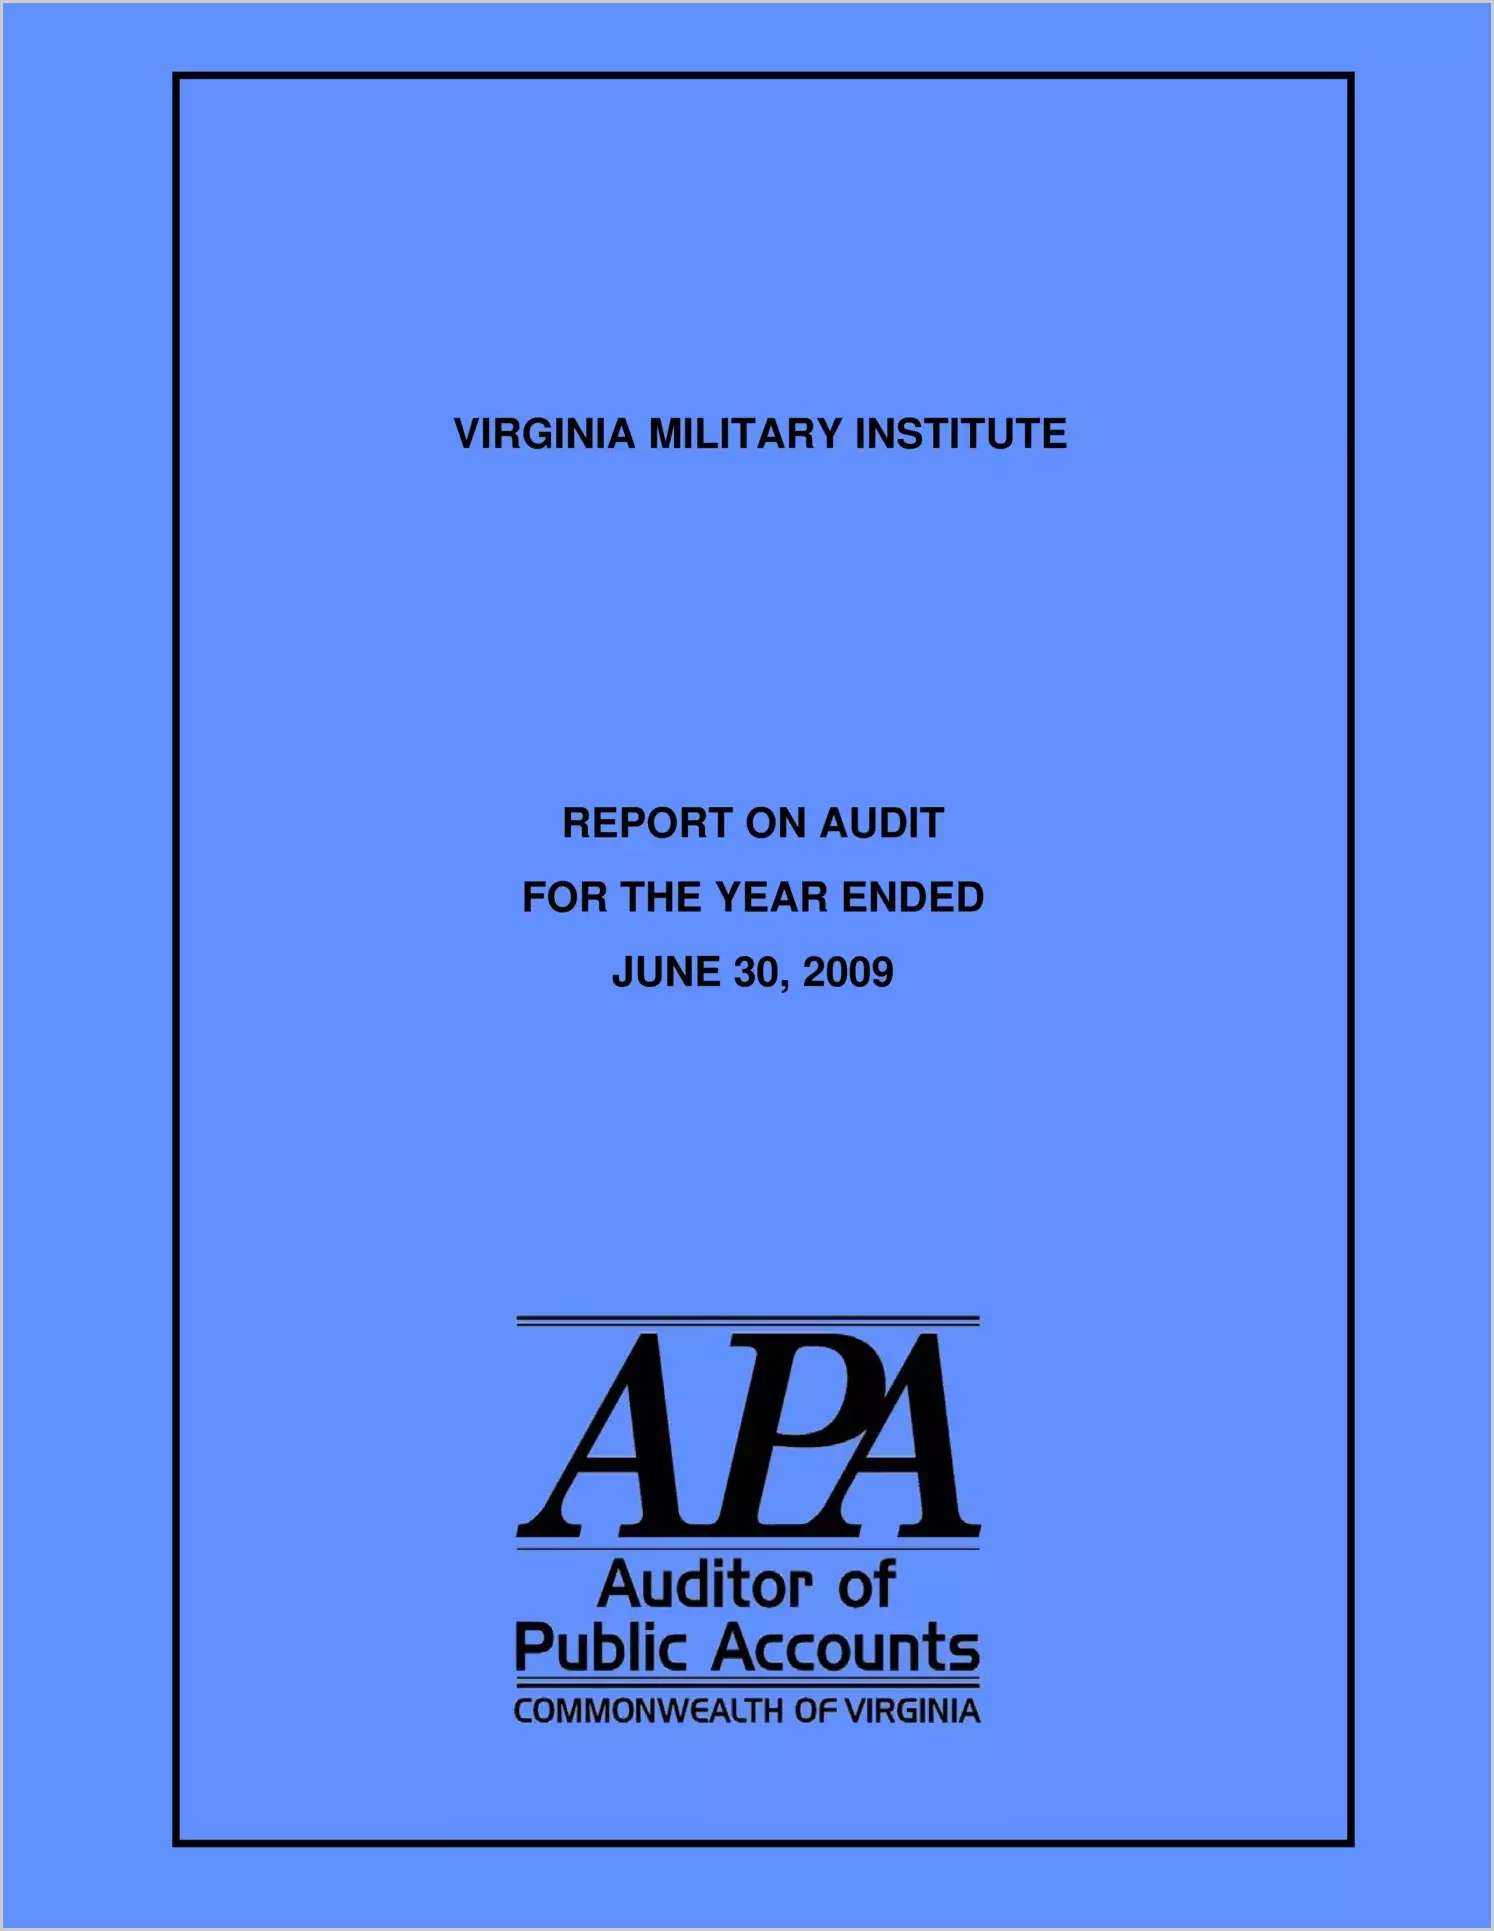 Virginia Military Institute report on audit for the year ended June 30, 2009